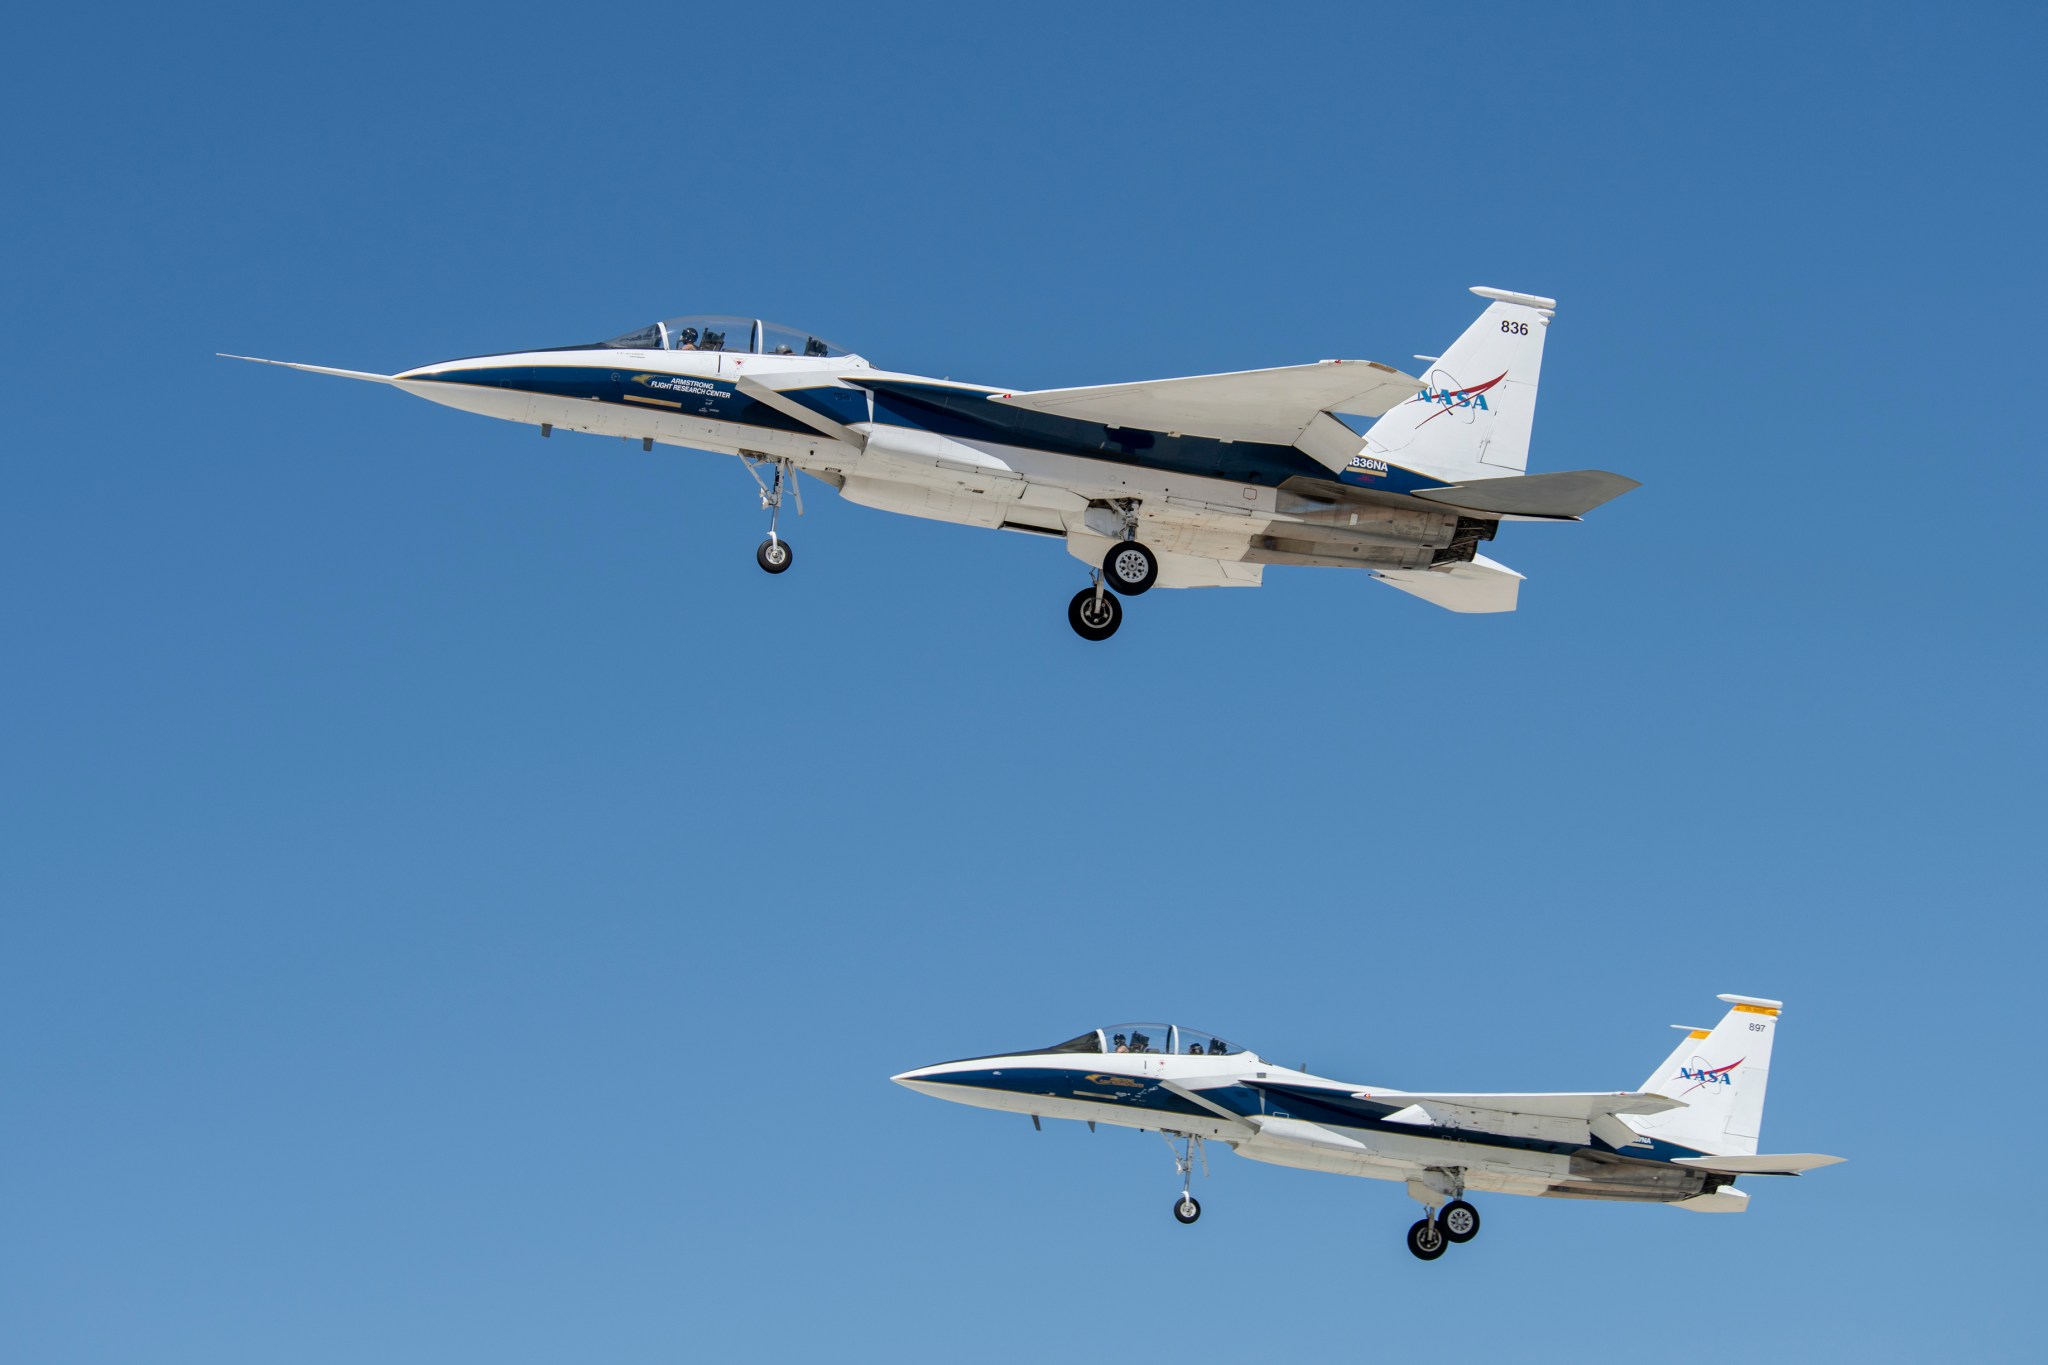 Two of NASA's F-15 research aircraft